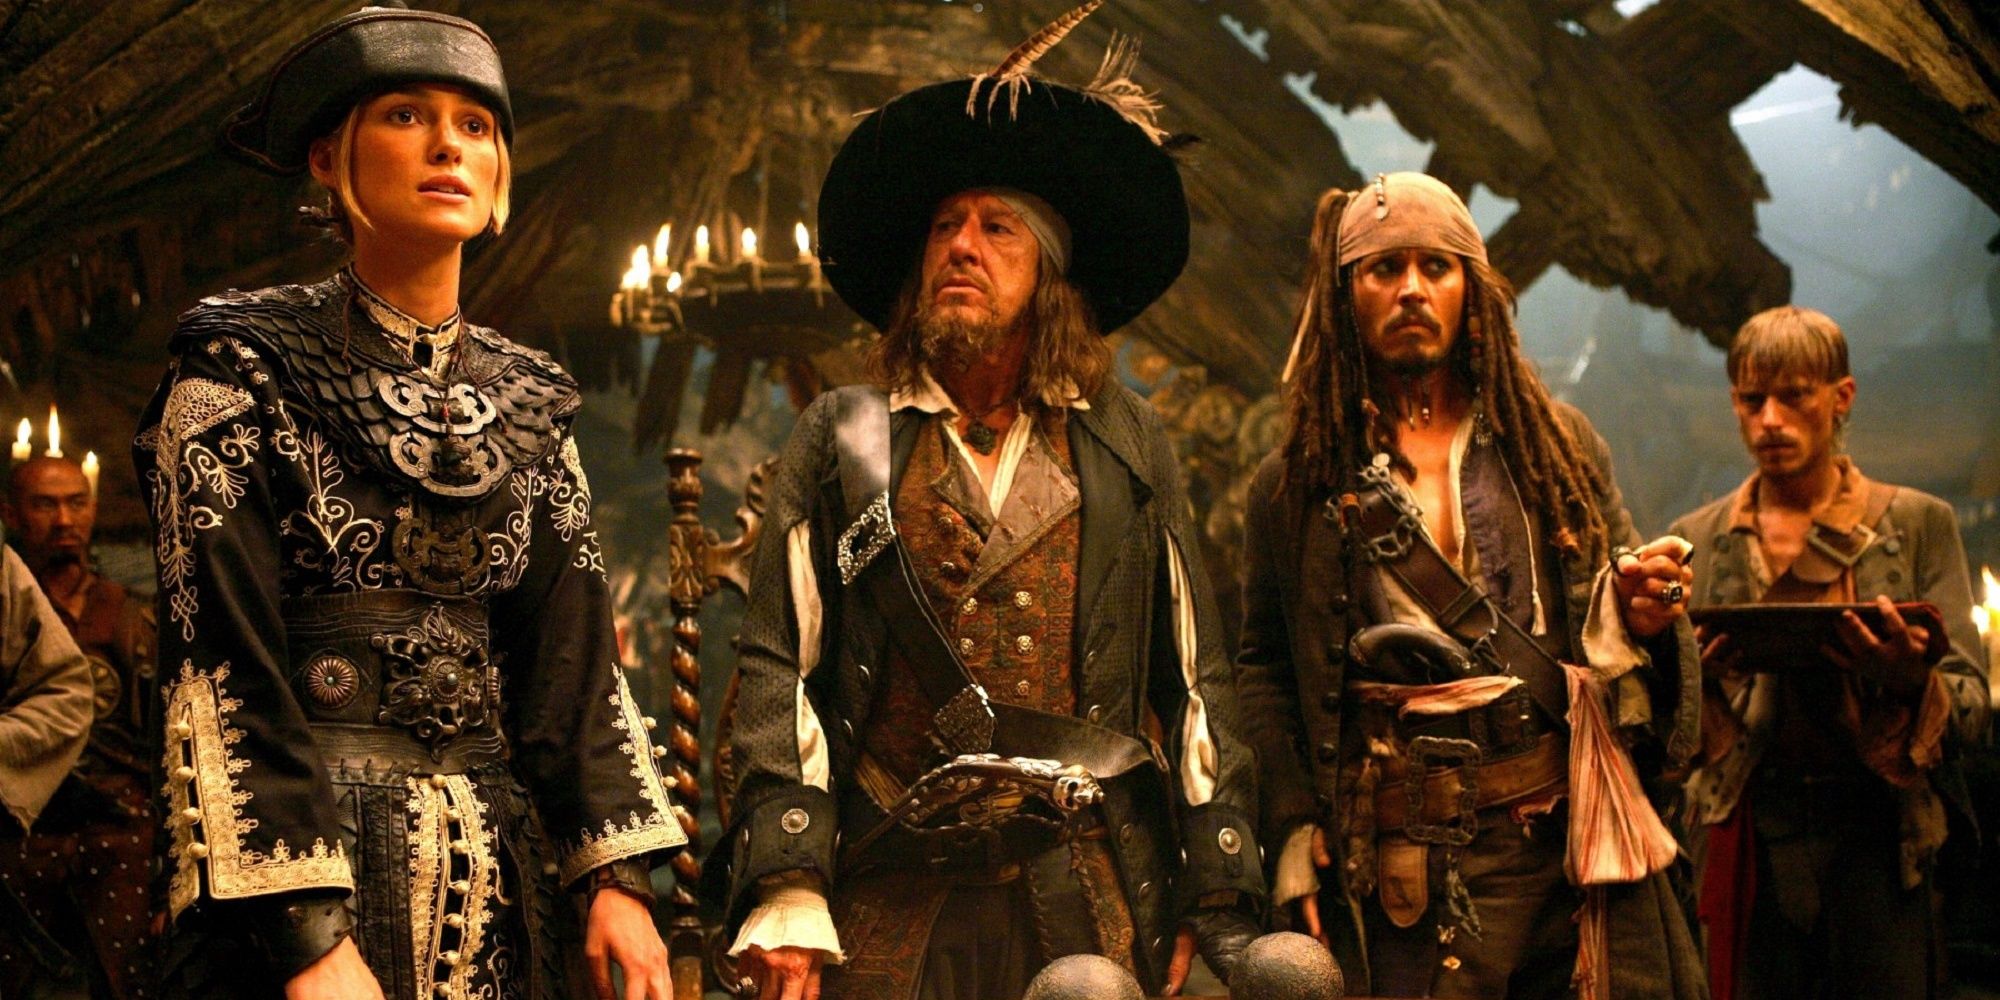 Elizabeth Swann, Captain Barbossa, and Jack Sparrow at Shipwreck Cove.